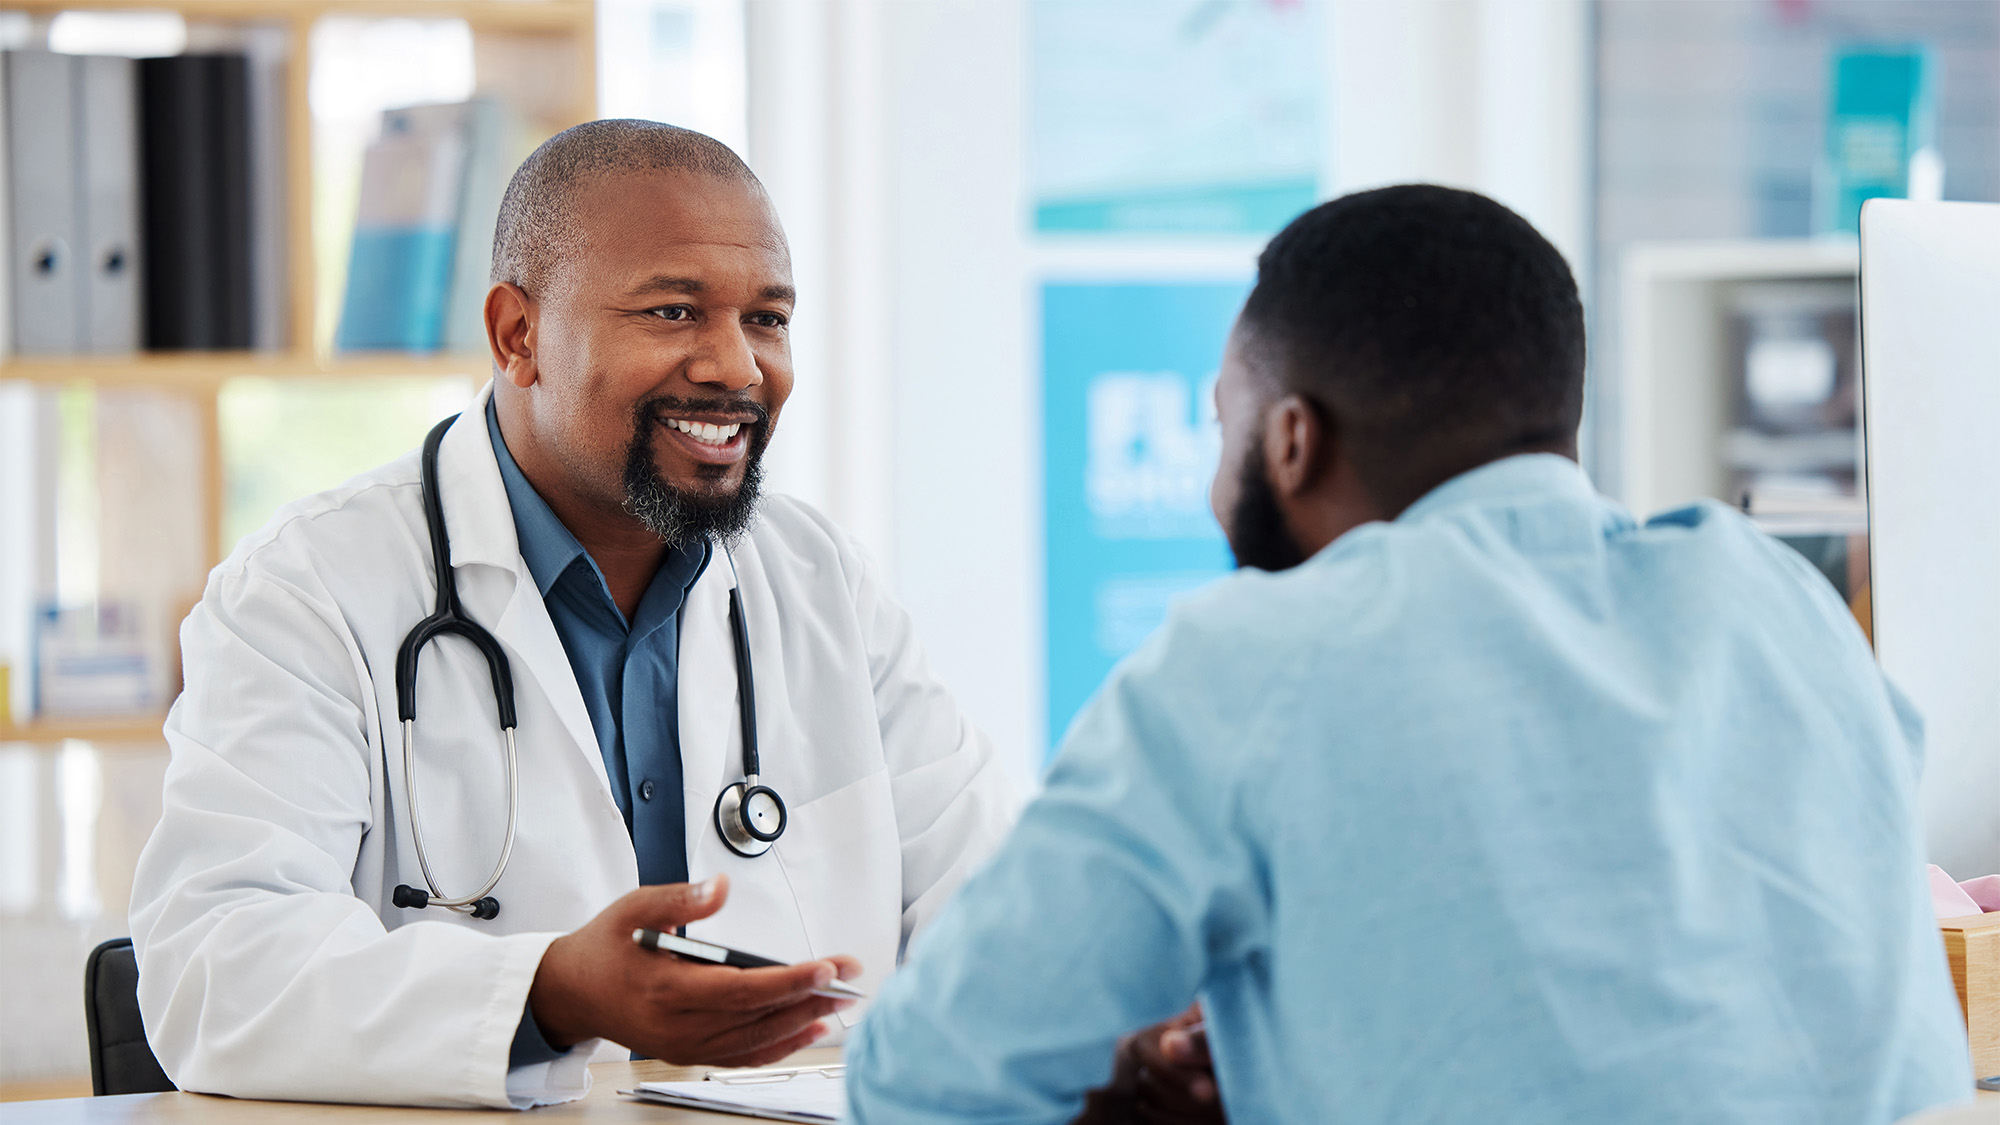 A black patient speaks to his black doctor